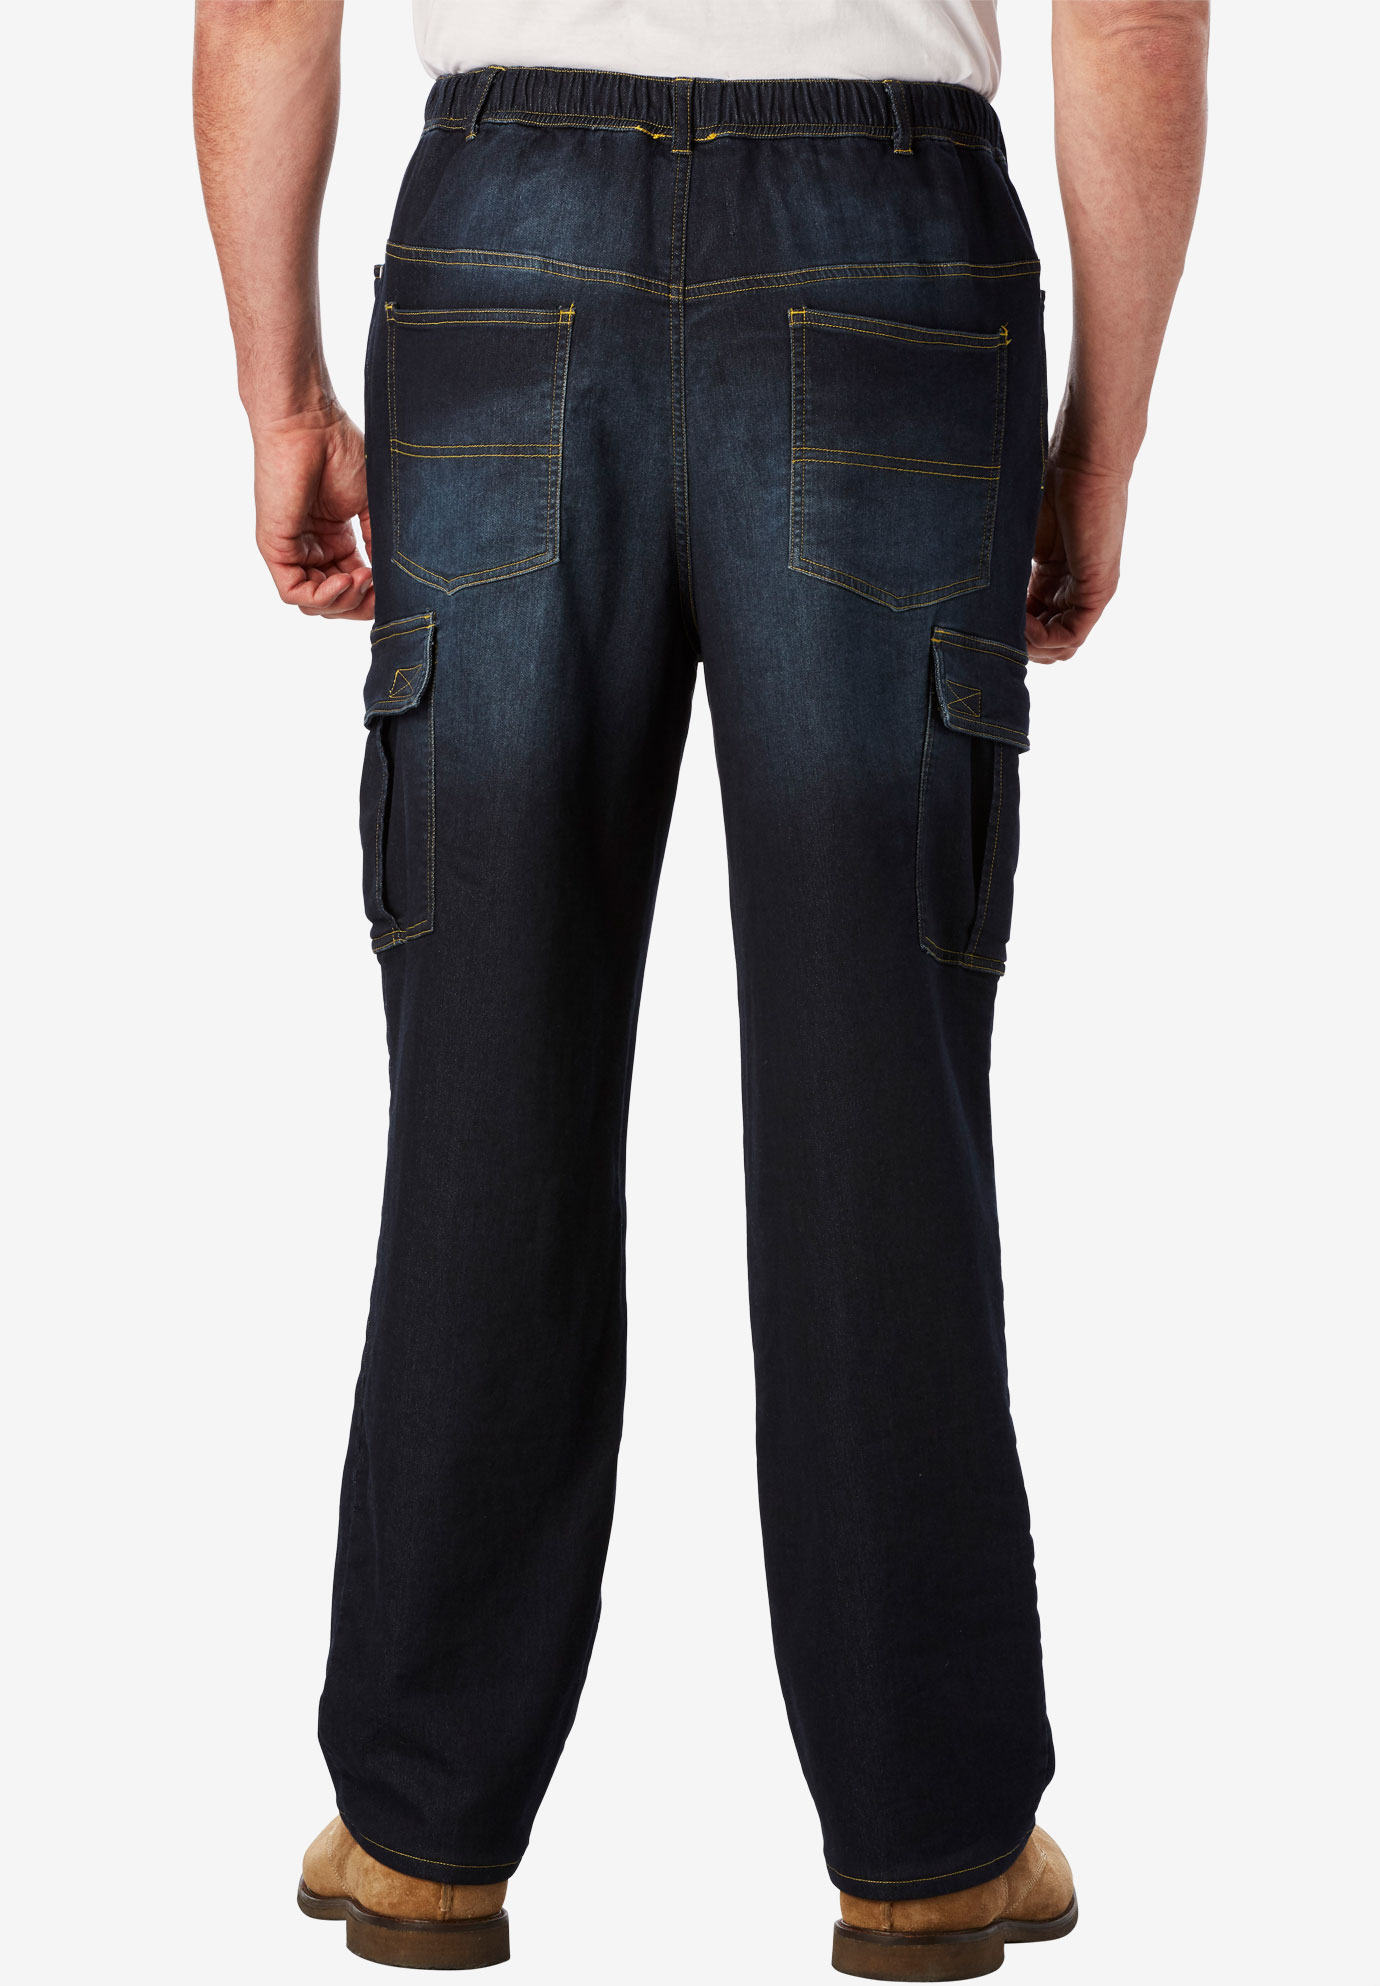 Kingsize Men's Big & Tall Relaxed Fit Cargo Denim Look Sweatpants Jeans - image 3 of 6